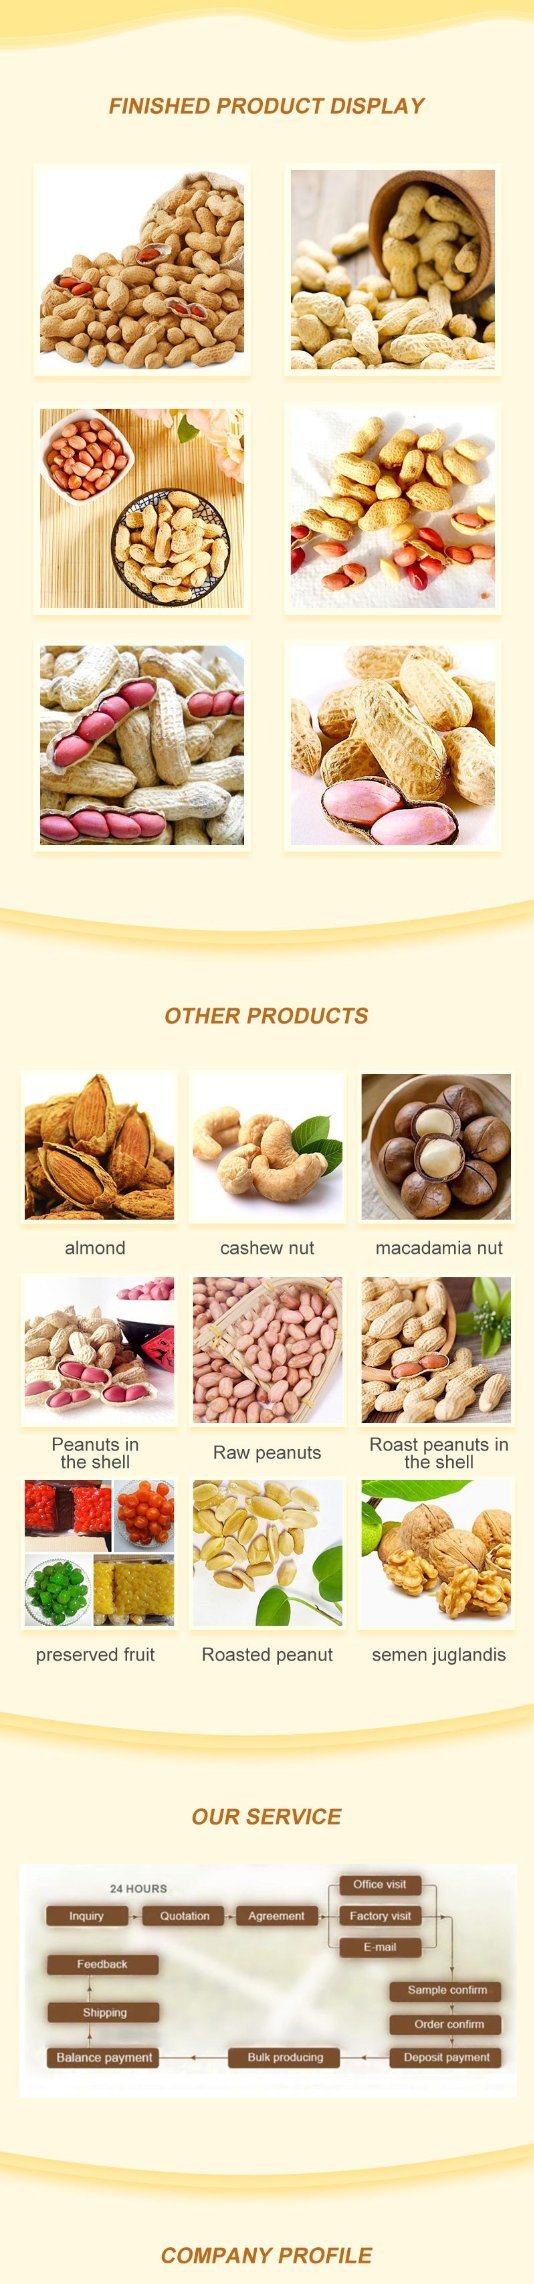 Chinese Factory Chinese Peanuts in Shell with Competitive Price